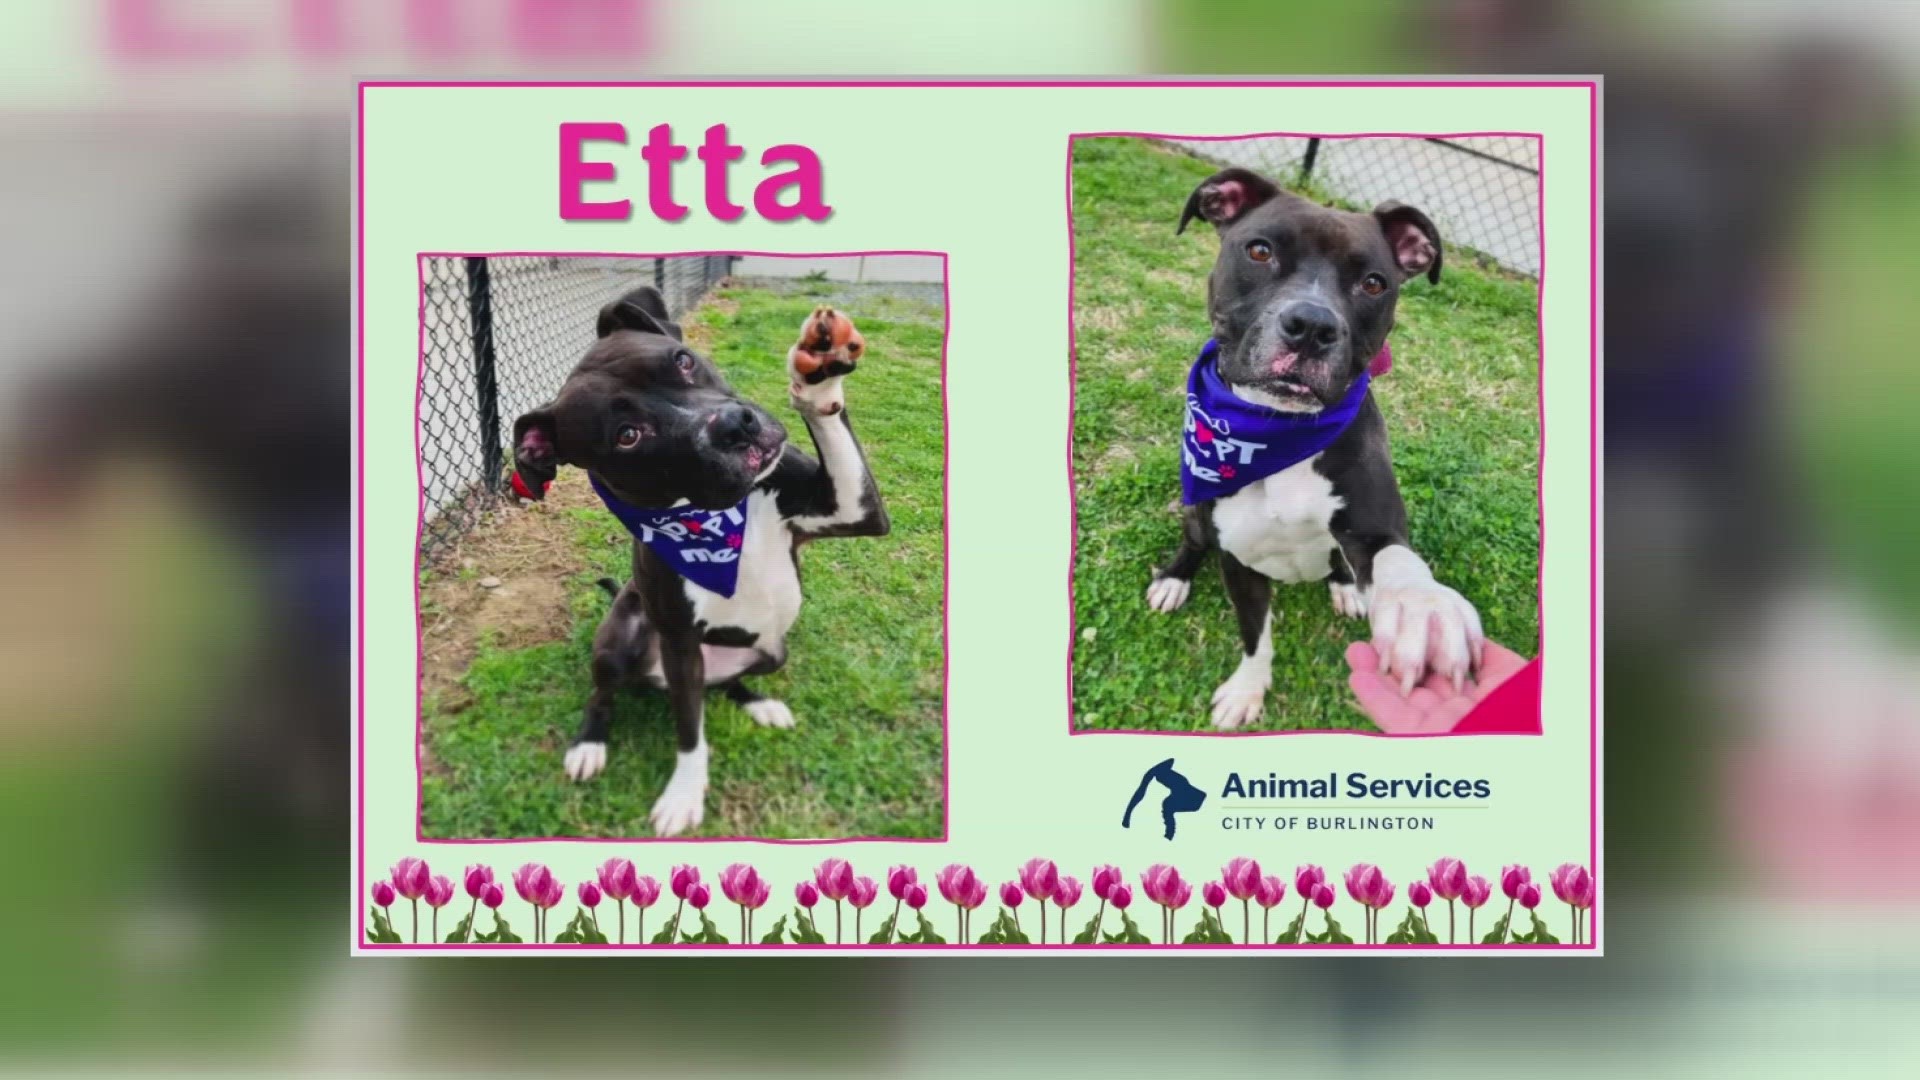 Let’s get Etta adopted!